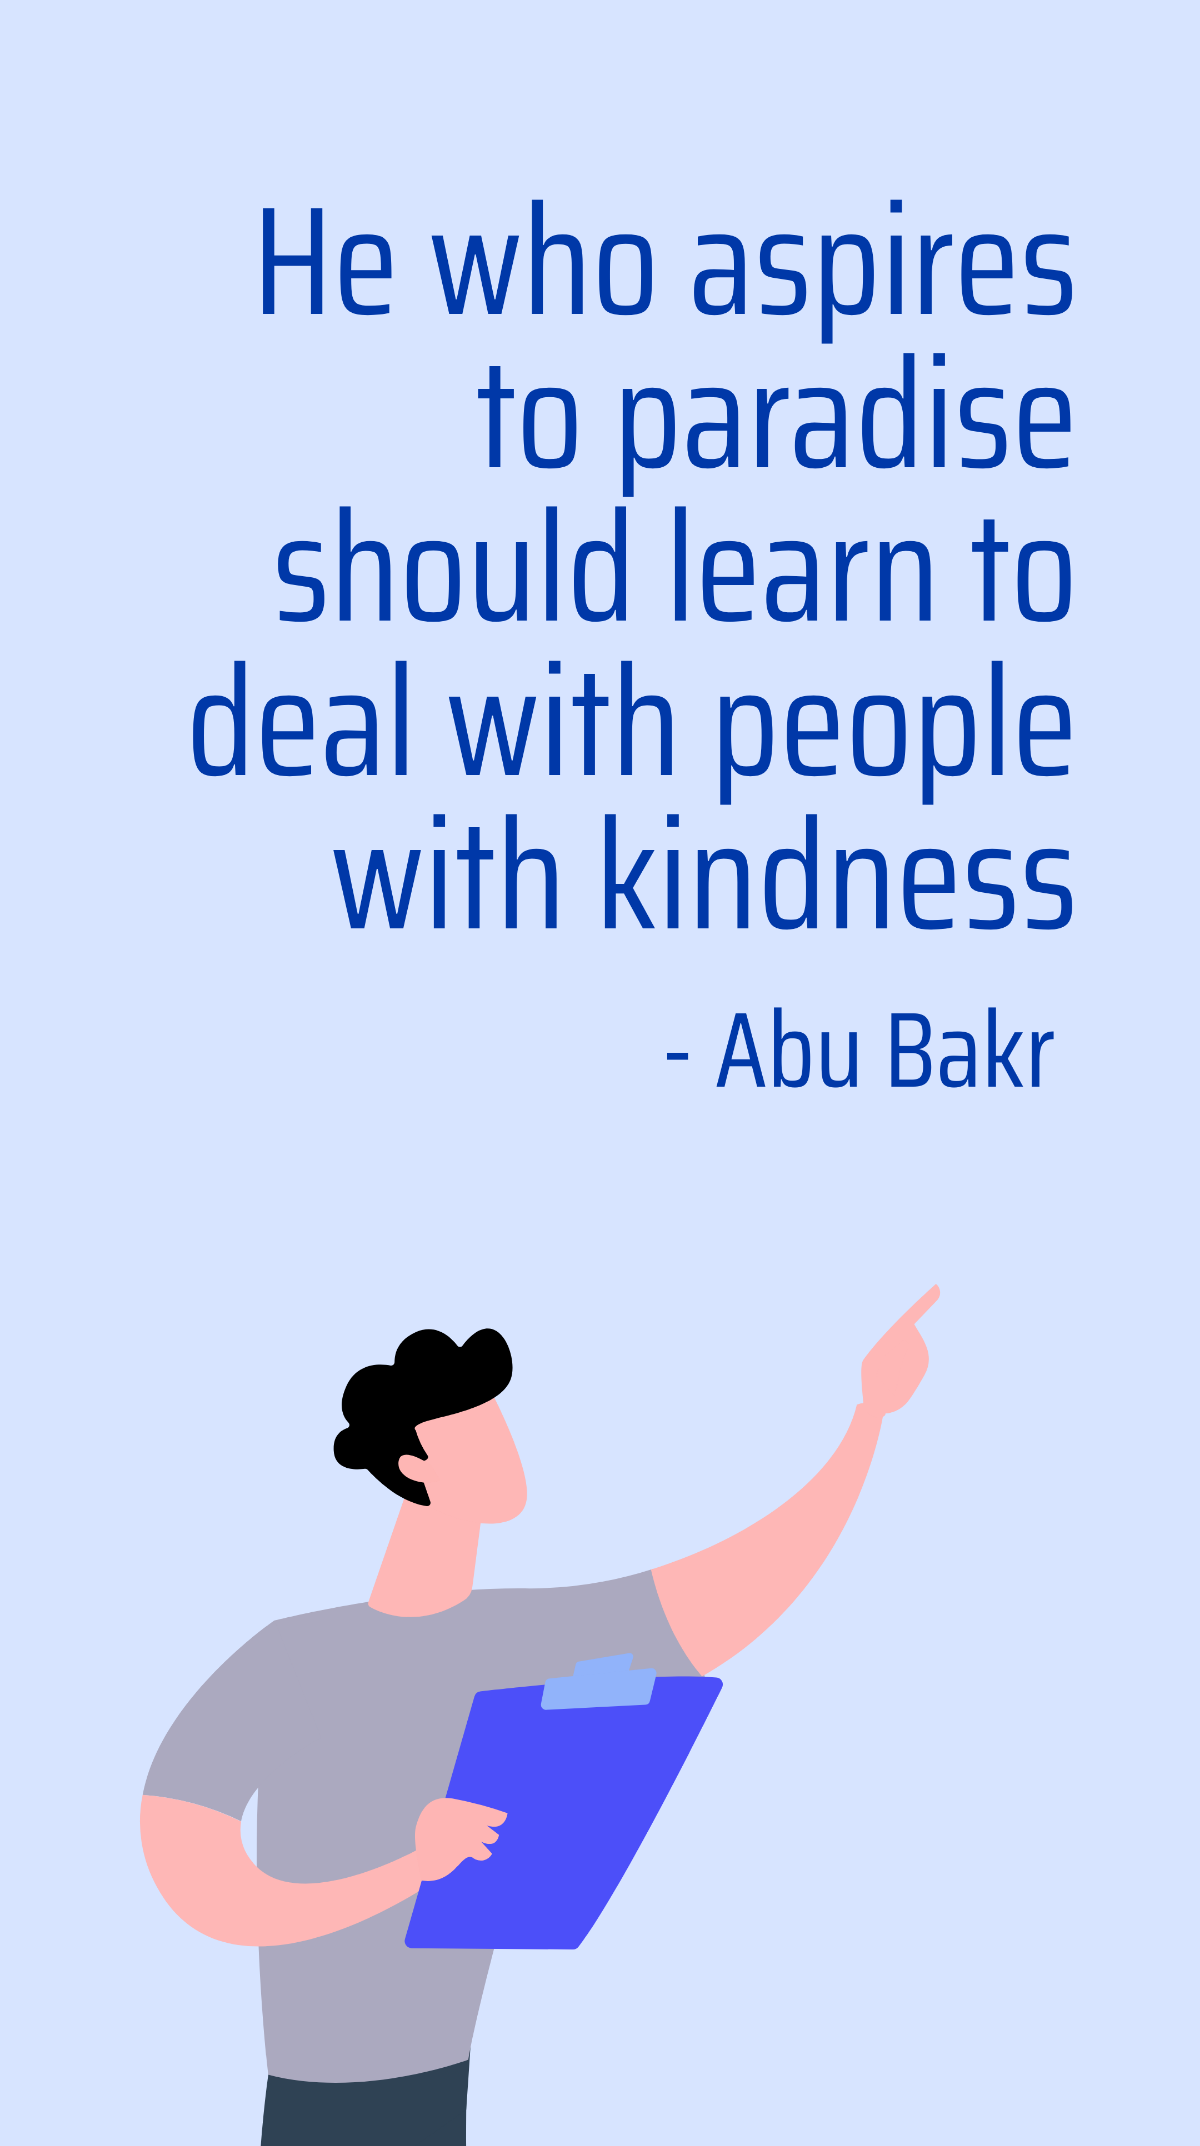 Abu Bakr - He who aspires to paradise should learn to deal with people with kindness